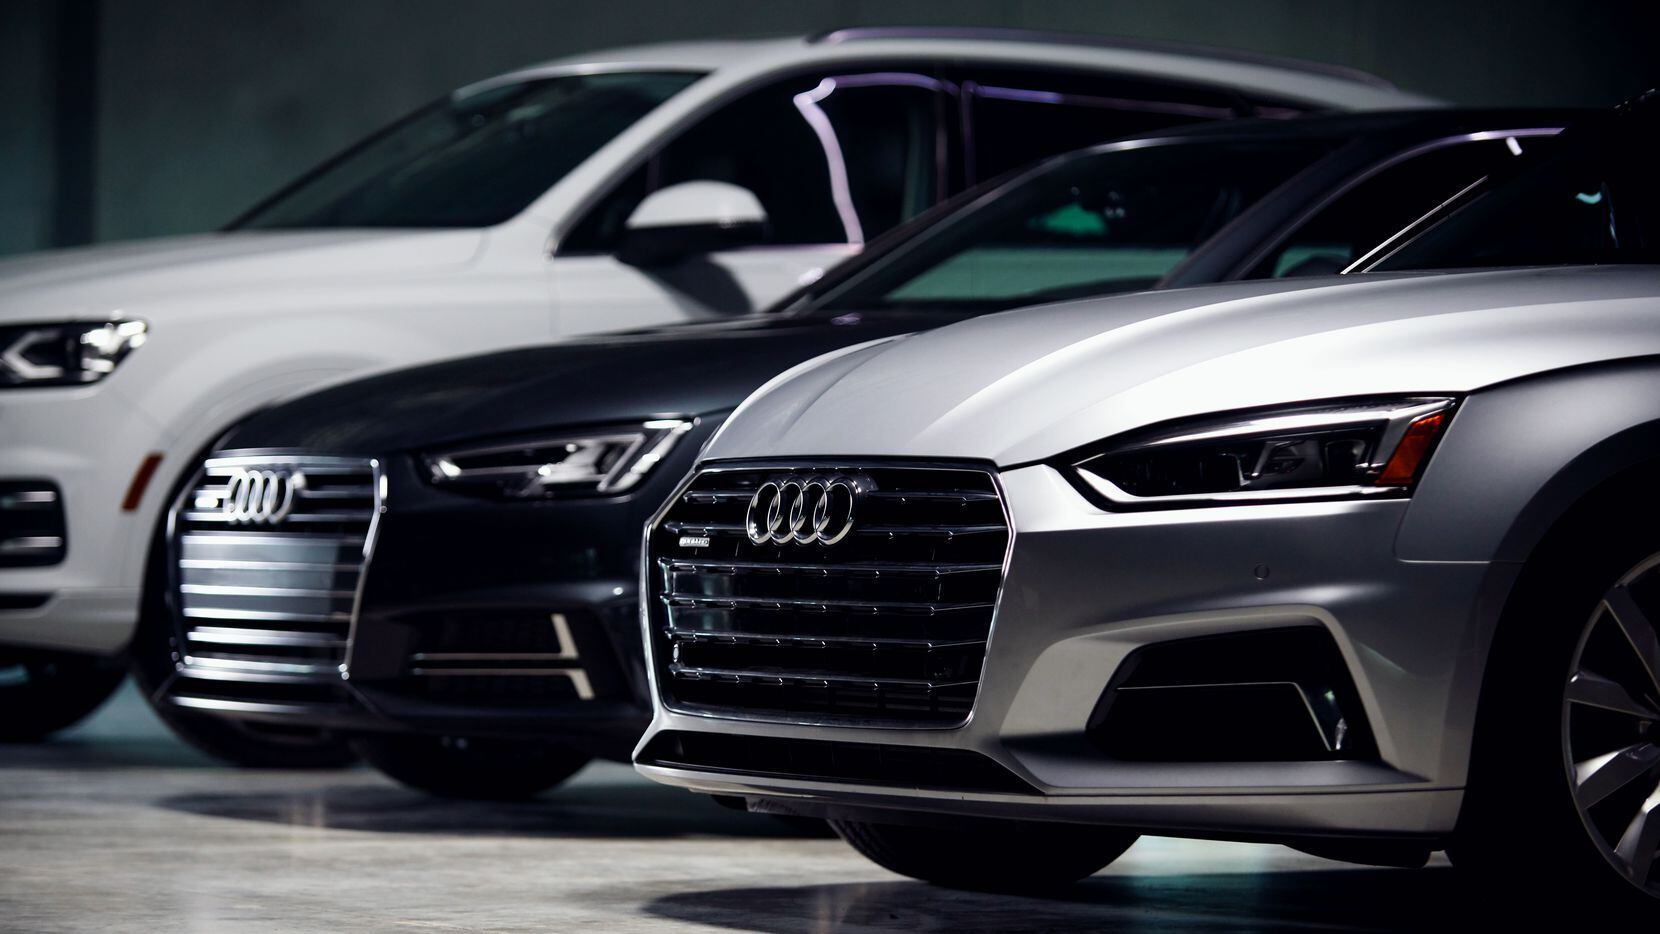 What's it like to have a garage full of Audis? It was great.